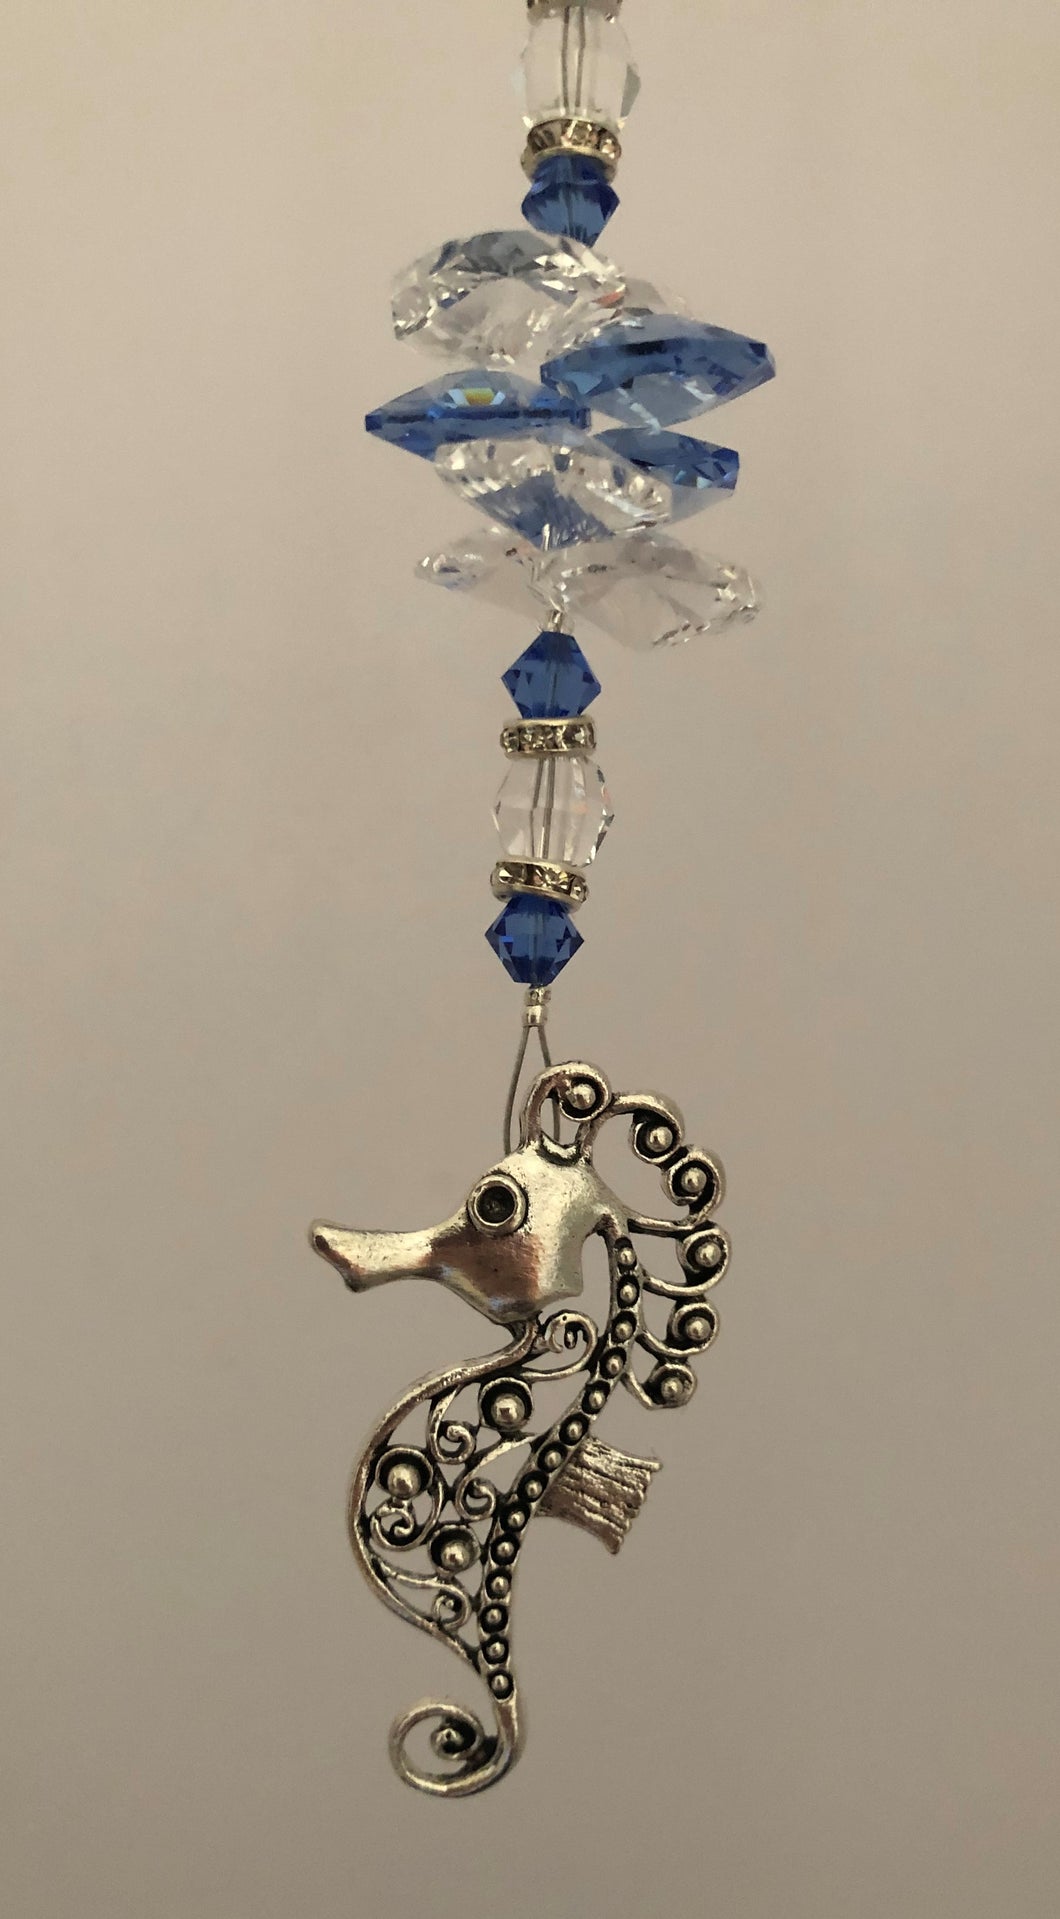 This beautiful Seahorse suncatcher which is decorated with crystals and Lapis Lazuli